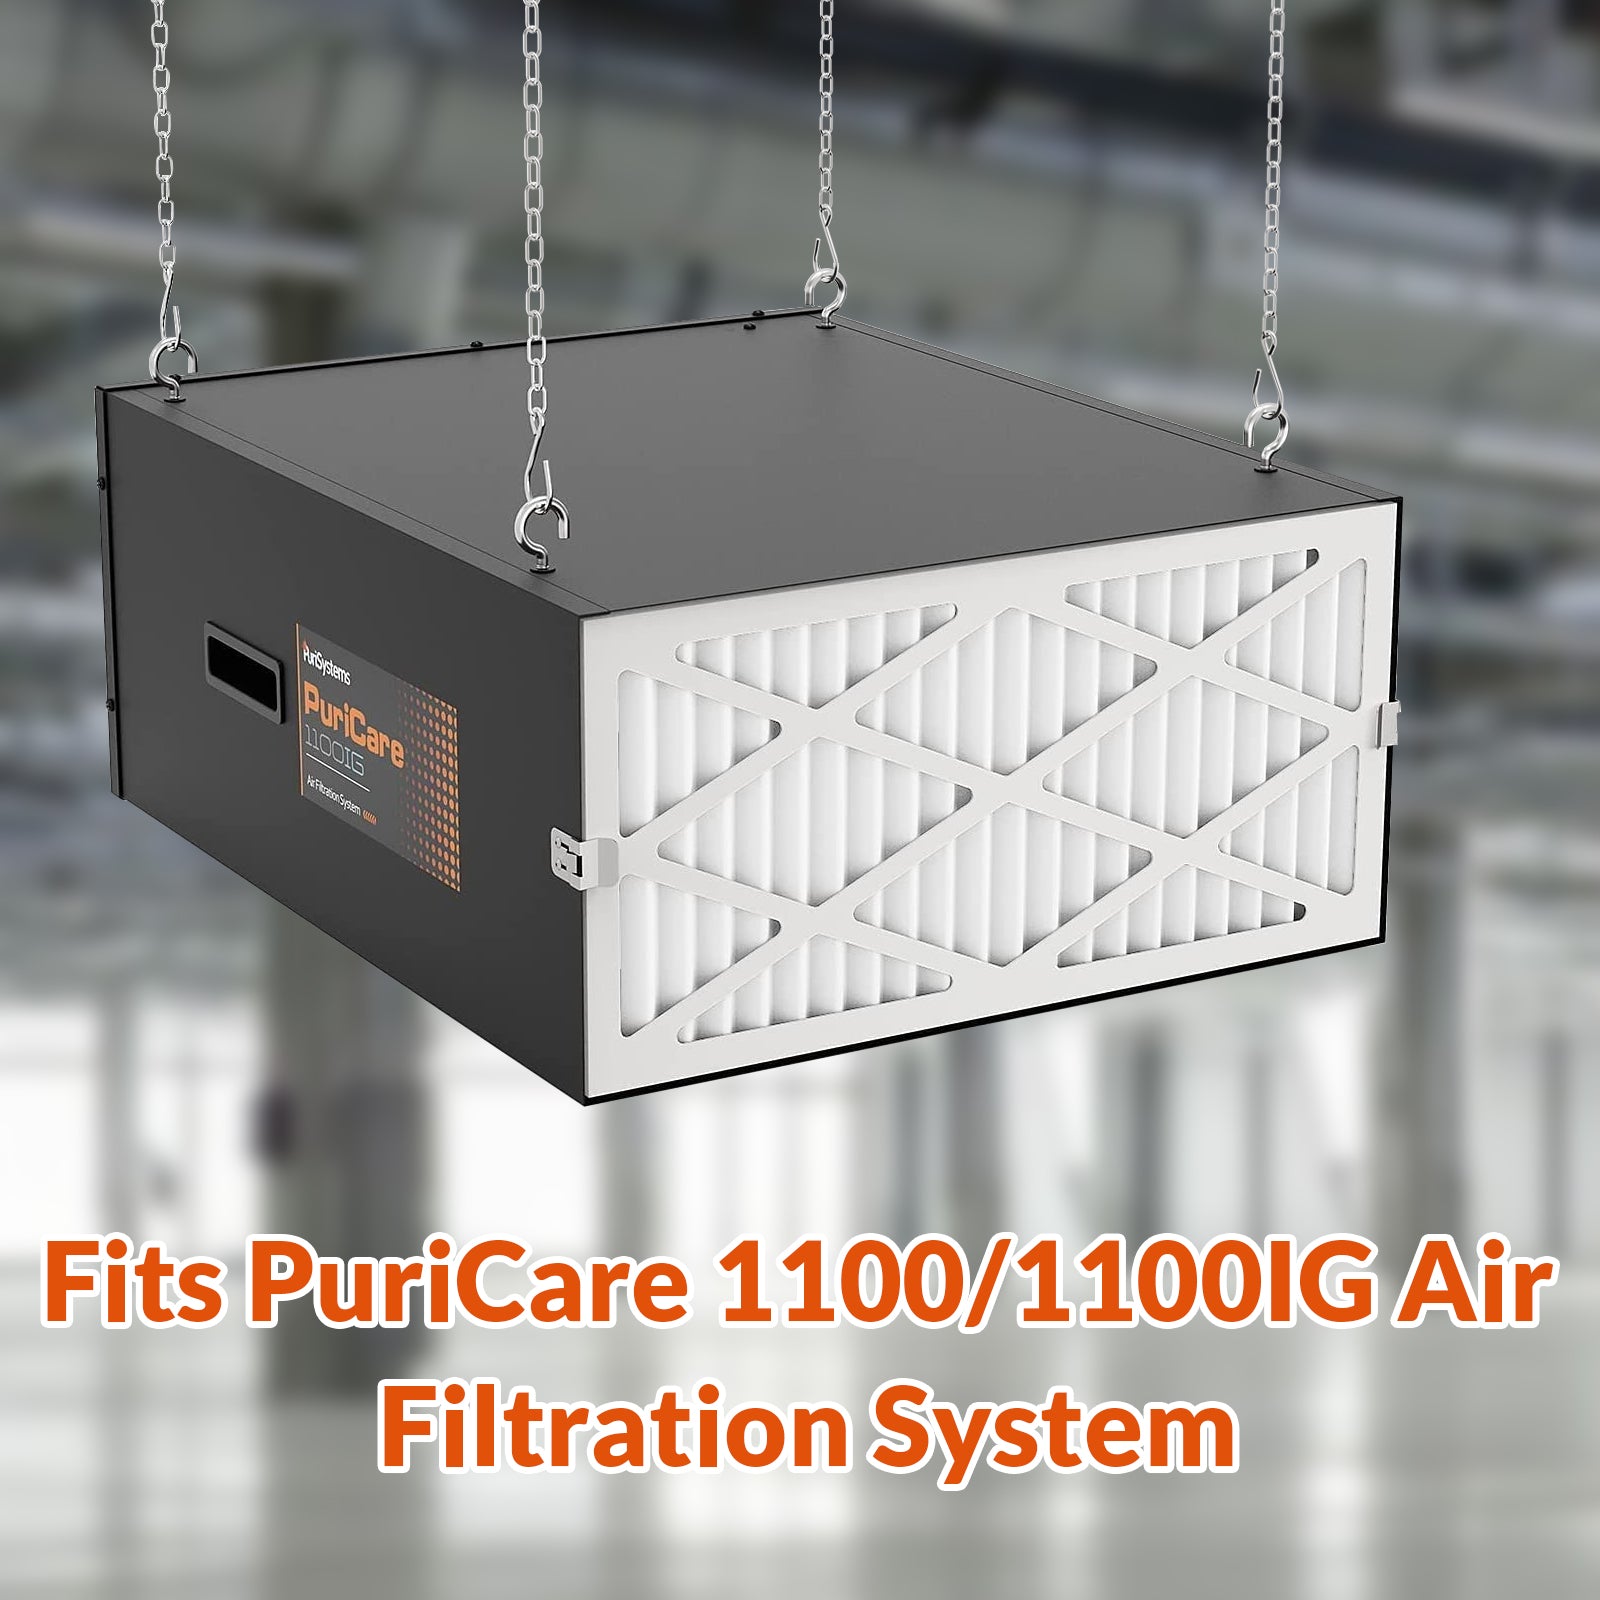 Purisystems 5-Micron Air Filters for PuriCare 1100/1100IG Air Filtration System, 3-Pack